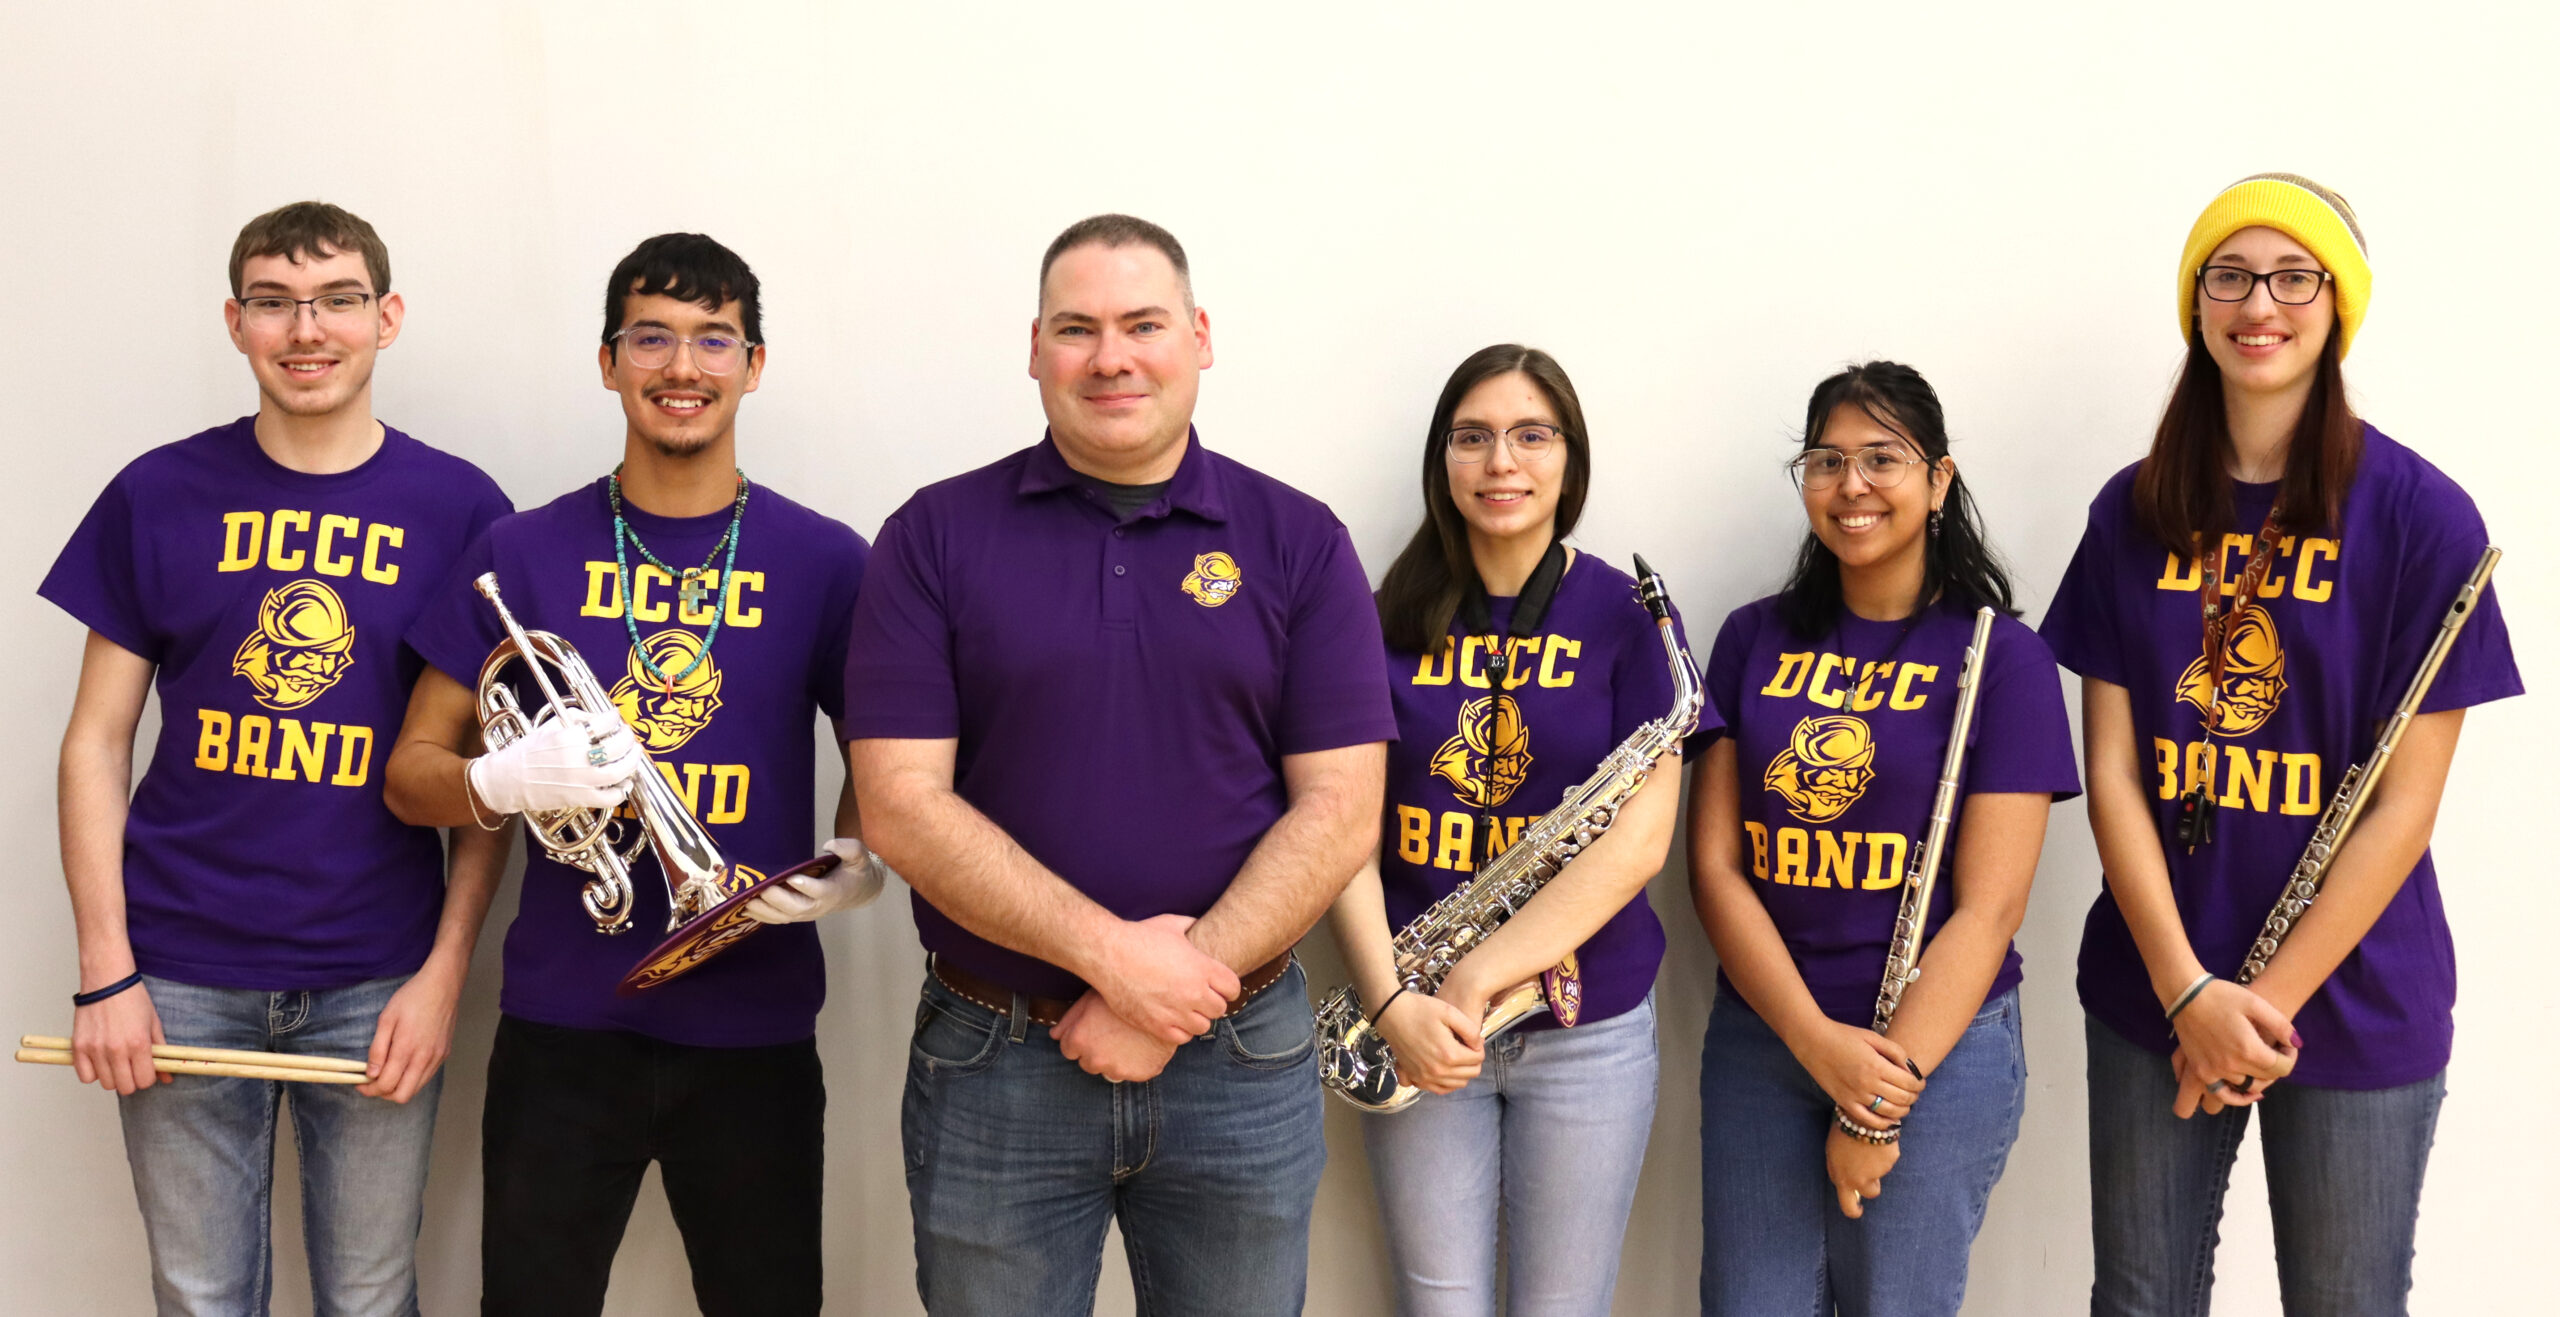 Six DC3 students have been selected for the KMEA In-Service Workshop honor band on Feb. 25, in Wichita, Kan. Pictured, from left to right, are Trevor Albert, a sophomore from Minneola, Kan.; Isaac Fuentes, a freshman from Rockdale, Texas; DC3 Band Director, Joel Vinson; Annia Llamas, a sophomore from Dodge City, Kan.; Esmeralda Gomez Garcia, a sophomore from Dodge City, Kan.; and Allison Haselhorst, a freshman from Dodge City, Kan. Not pictured is Parker Holuska, a sophomore from Dodge City, Kan. [Photo by Luke Fay]